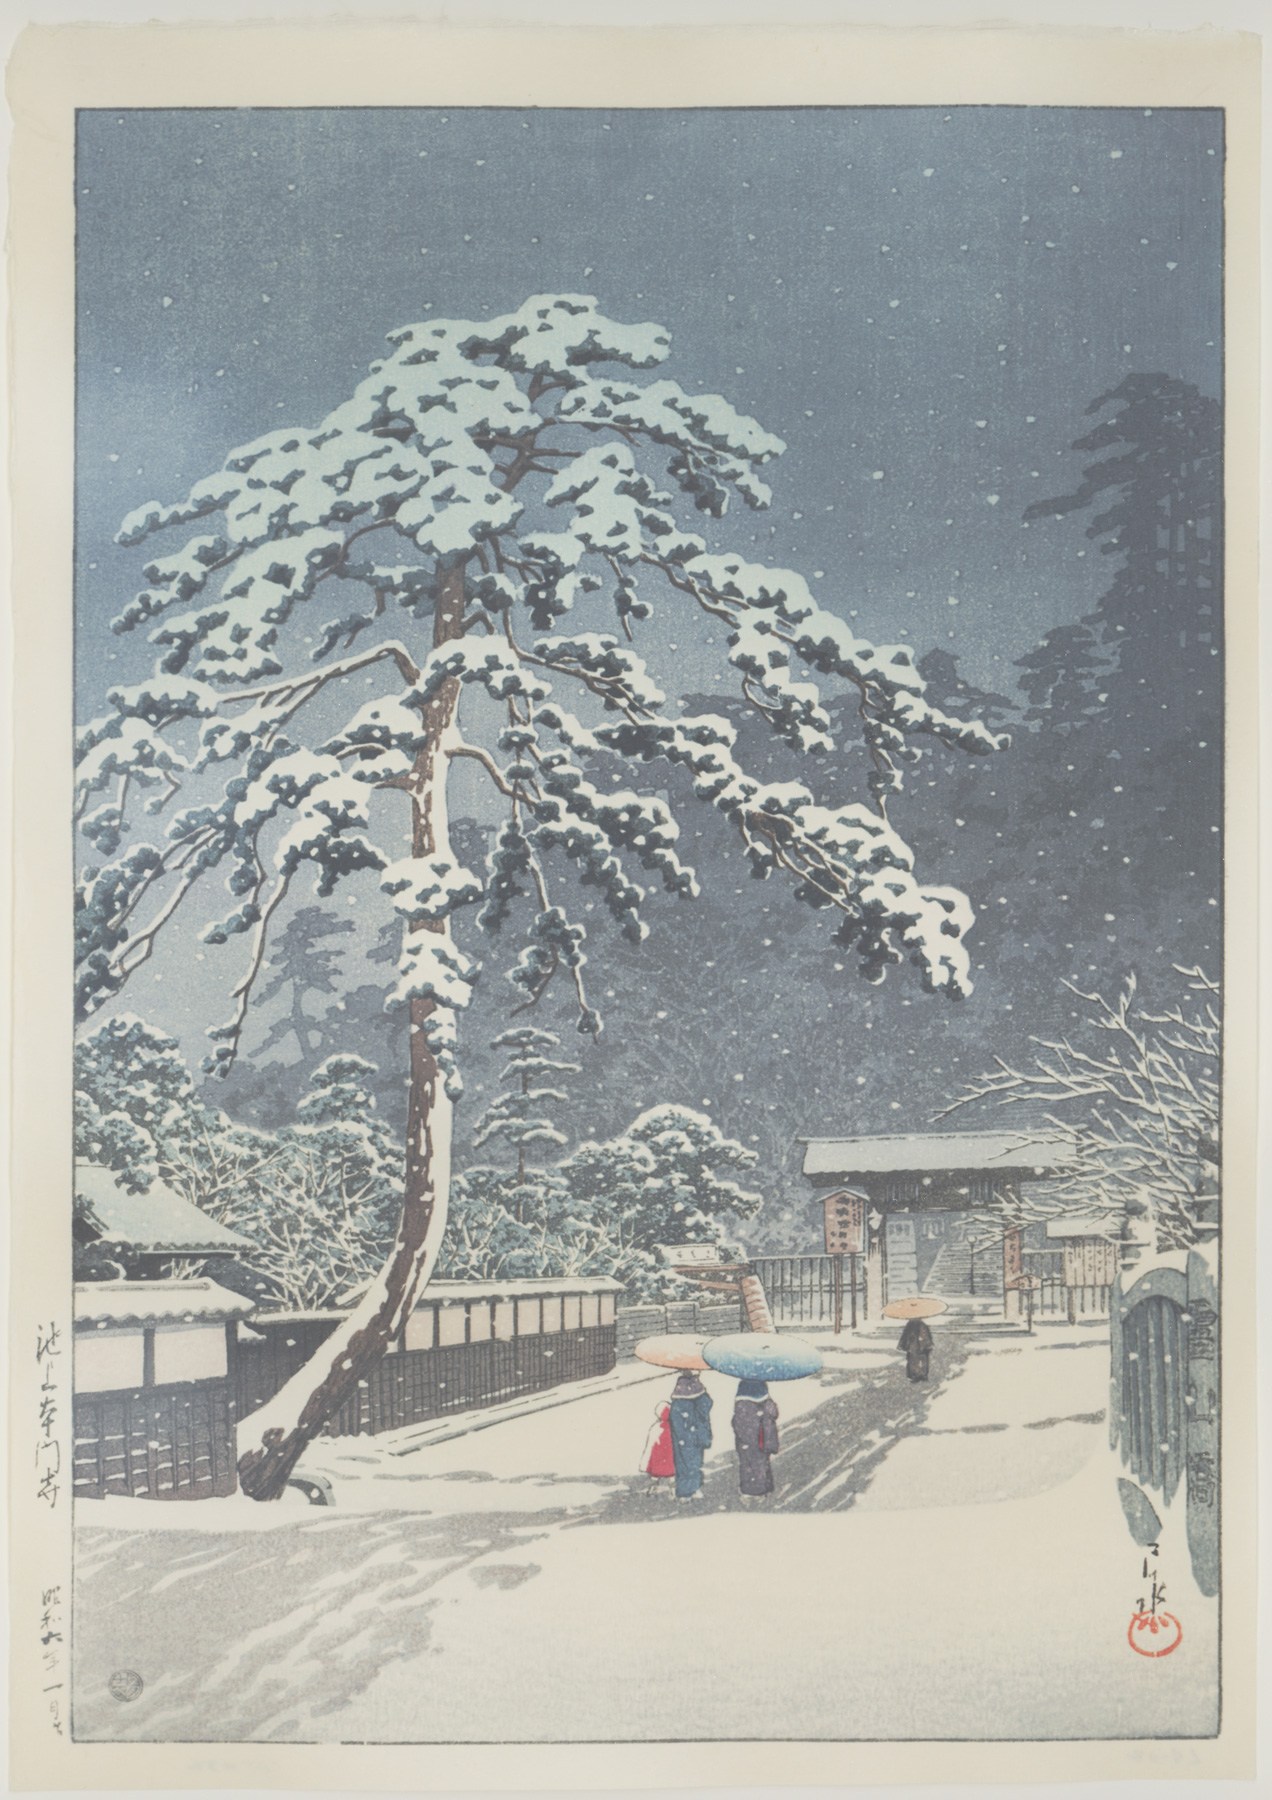 Honmon Temple, Ikegami - The Lavenberg Collection of Japanese Prints